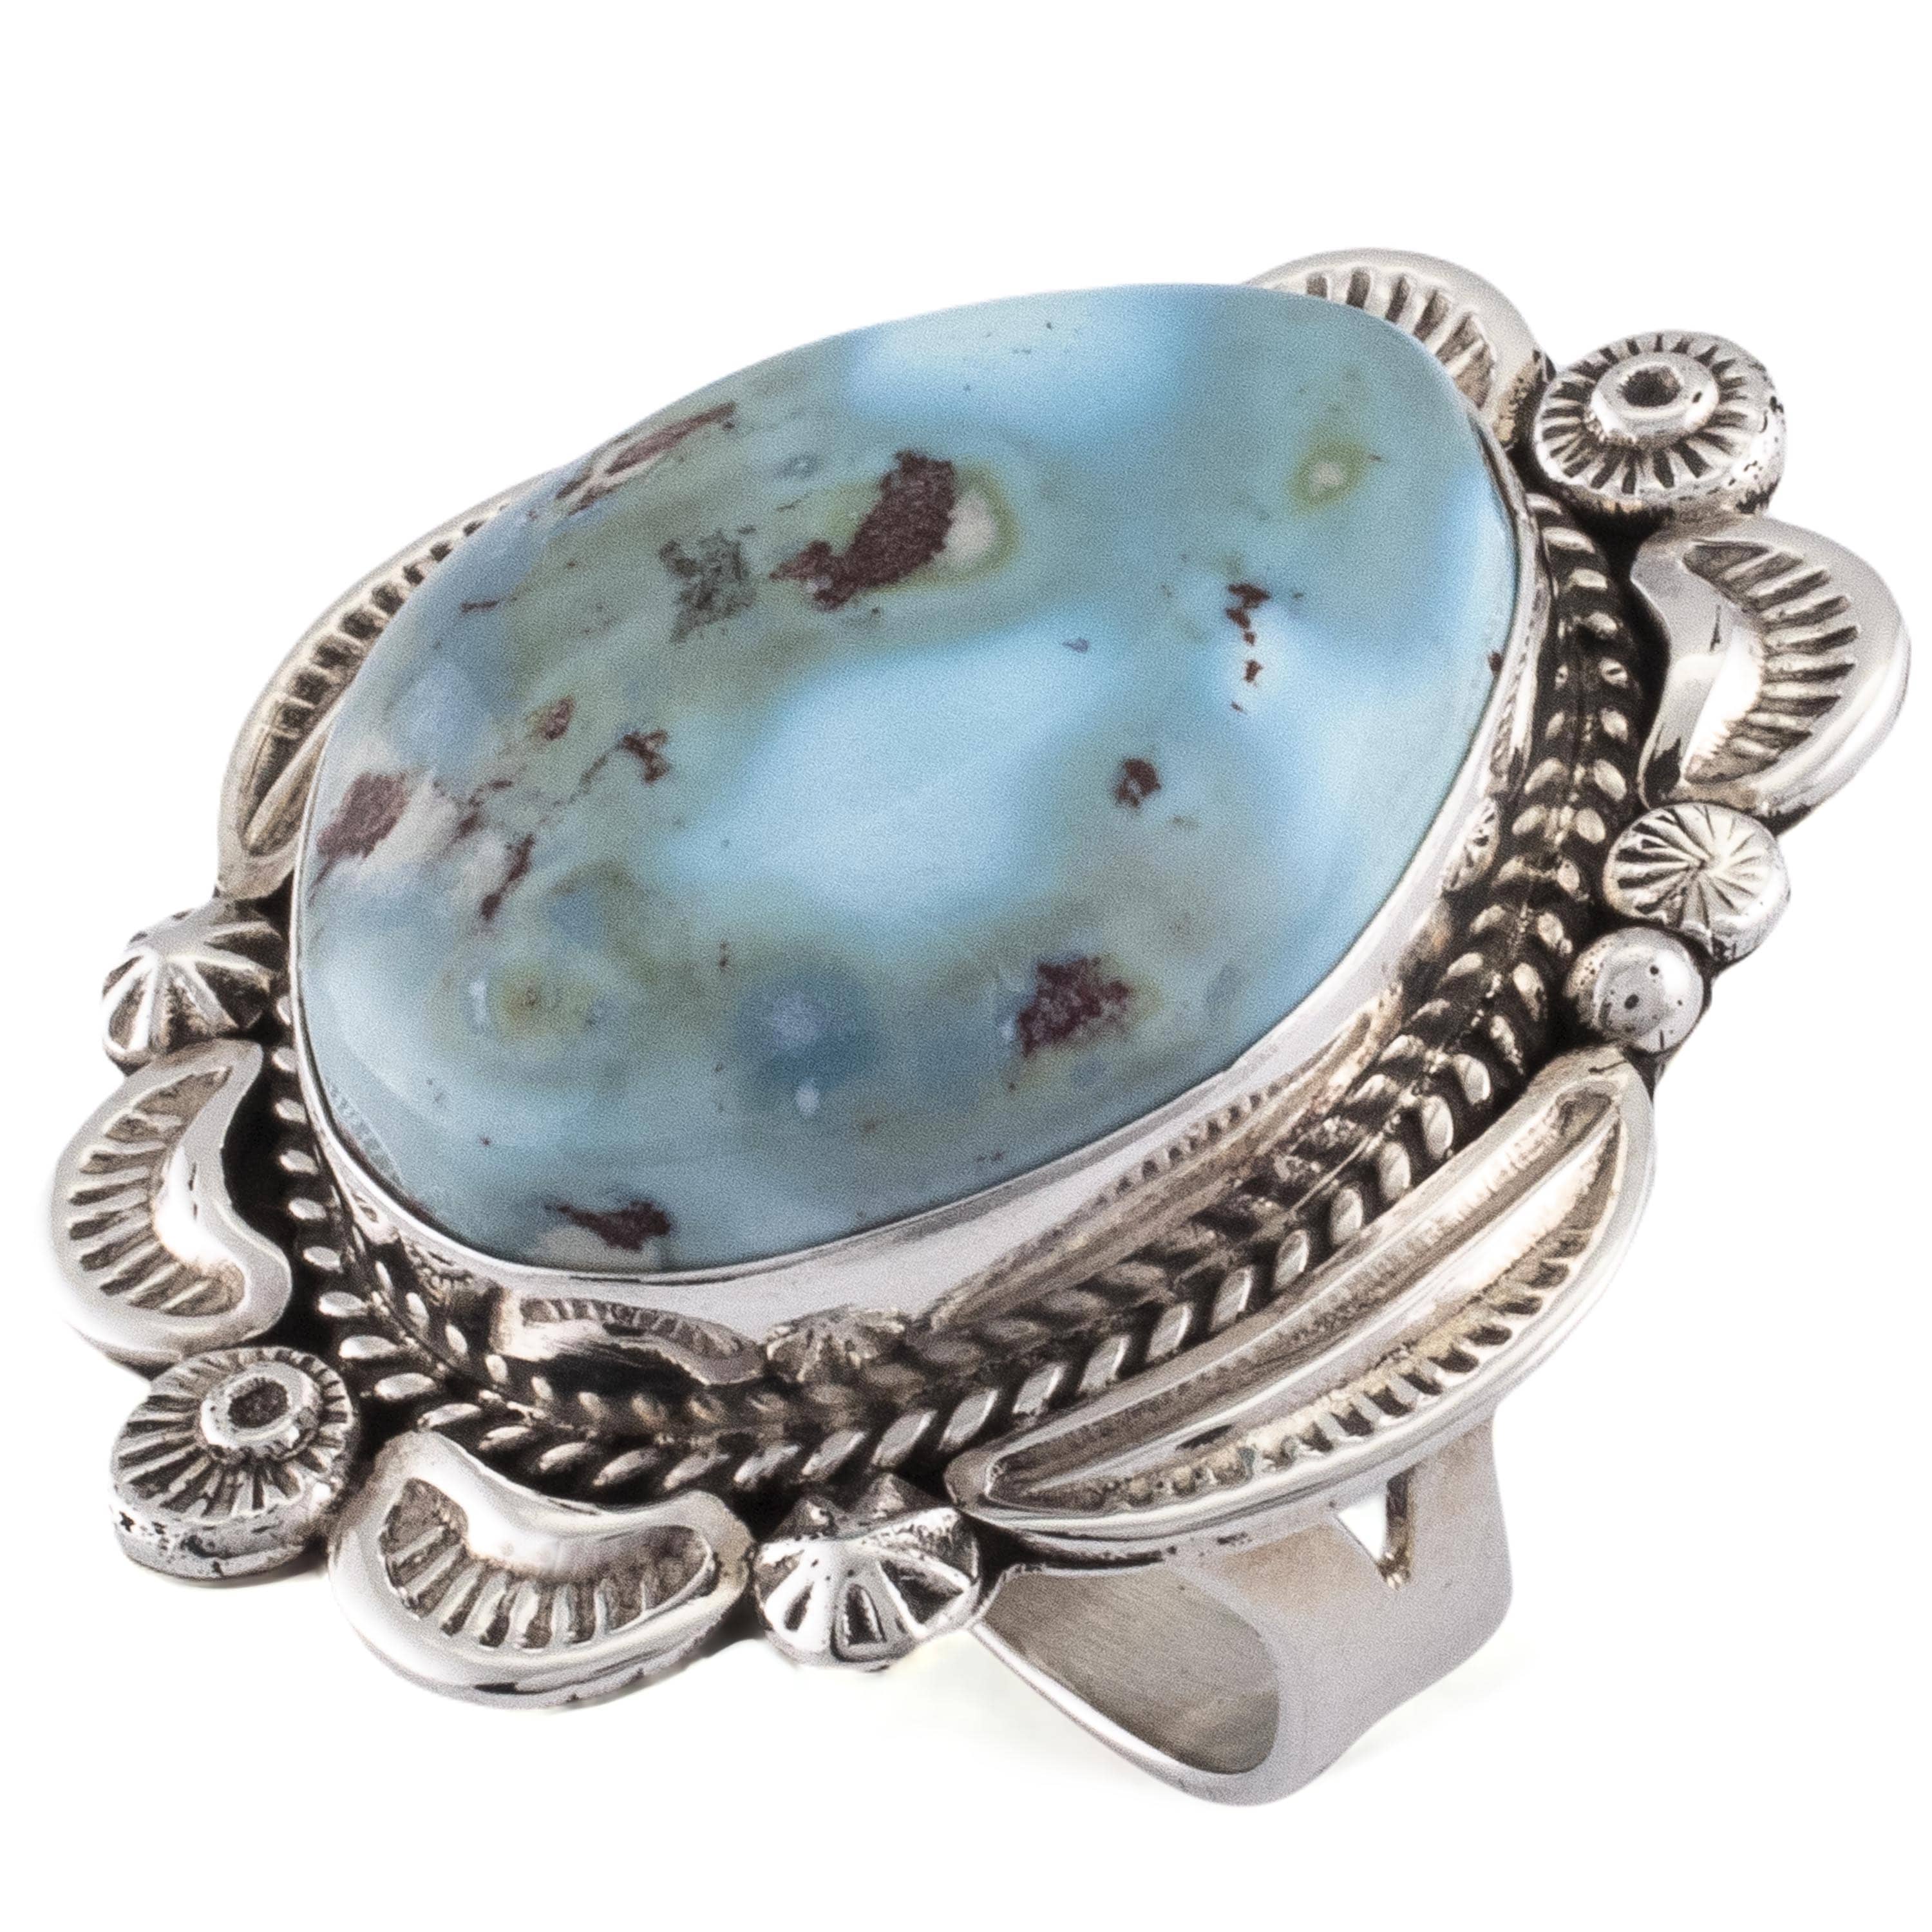 Kalifano Native American Jewelry 7.5 E.M. Linkin Golden Hills Turquoise USA Native American Made 925 Sterling Silver Ring NAR1100.004.75